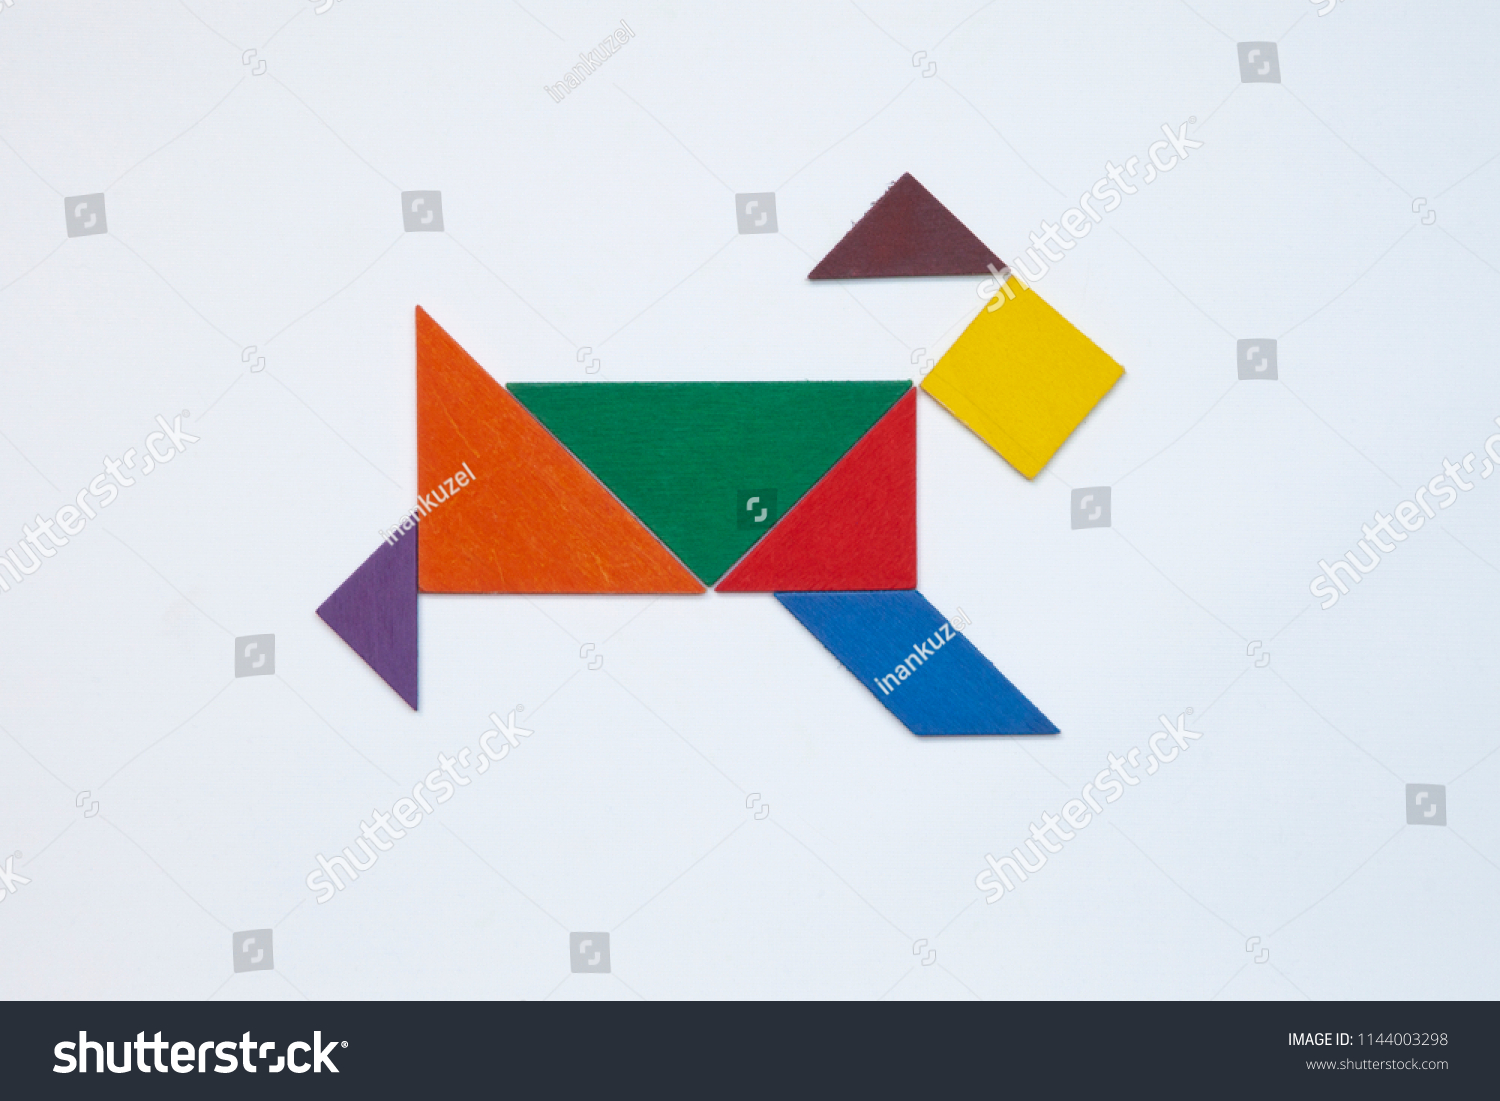 Tangram. Traditional Chinese dissection puzzle, seven tiling pieces - geometric shapes: triangles, square (rhombus), parallelogram. #1144003298